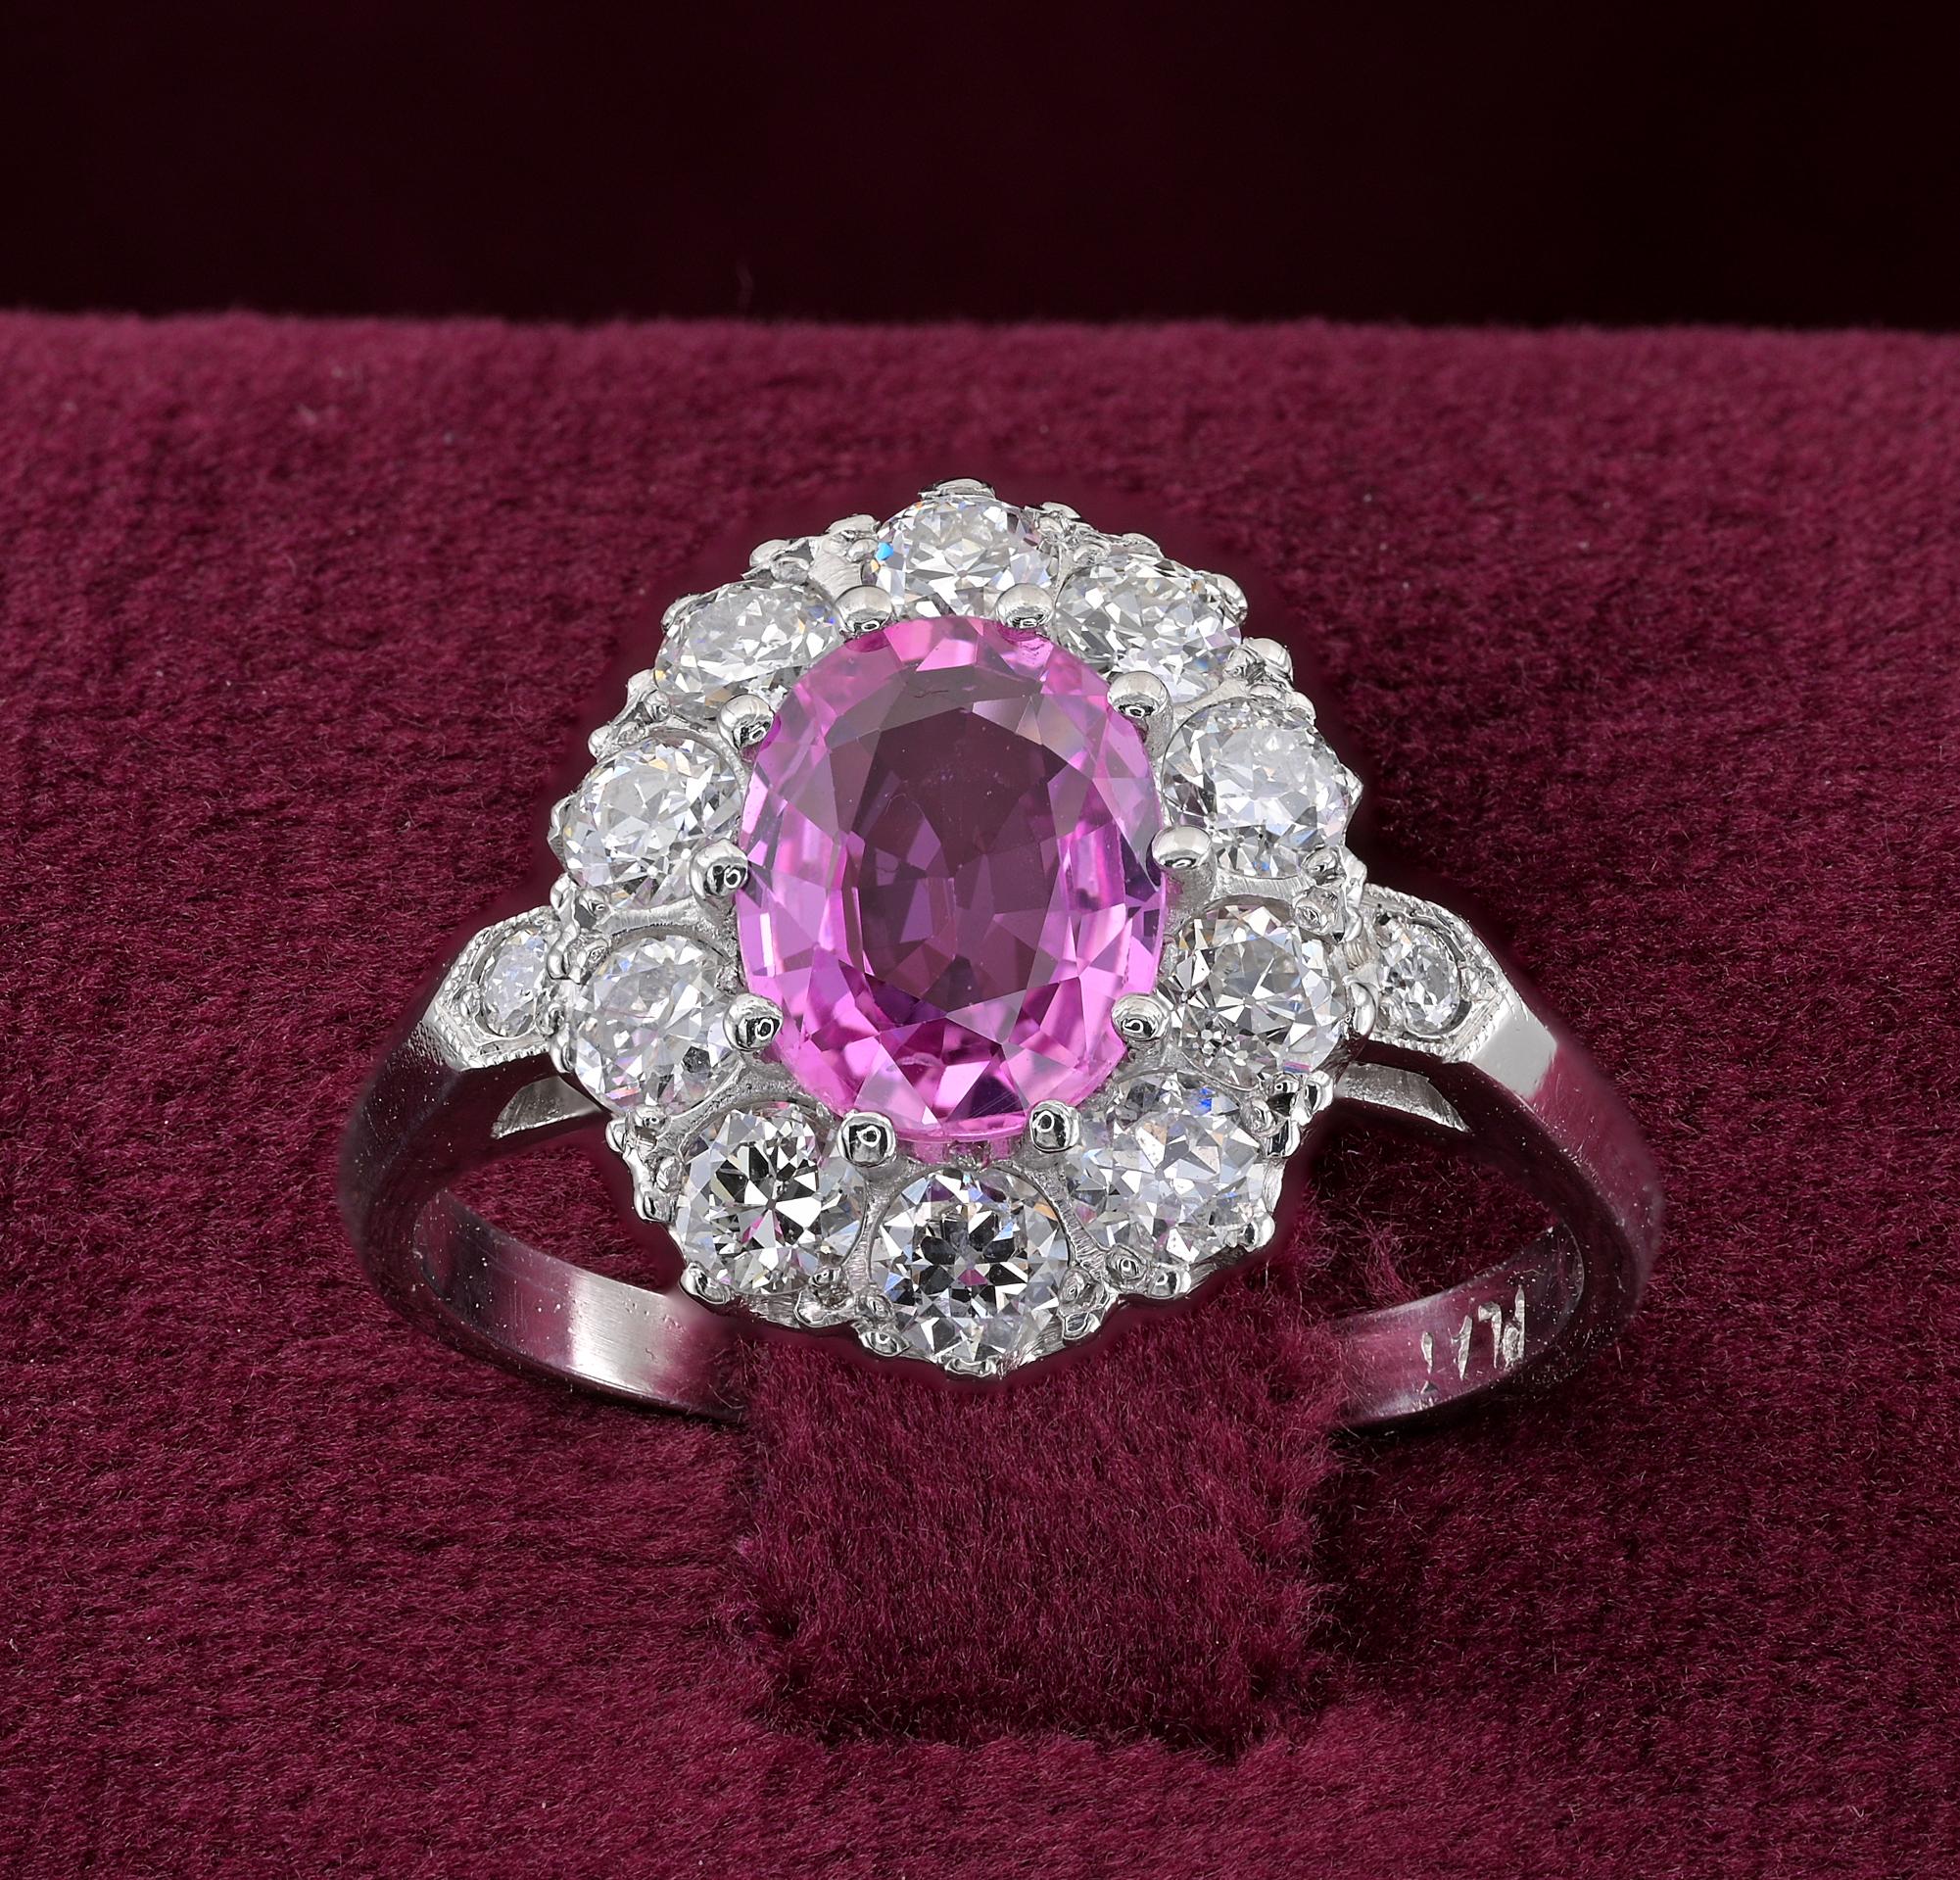 Pink for Ever
This stunning mid century ring would be perfect for engagement of life companion
Beautiful, classy, cluster ring taking the oval shape from the main stone, entirely crafted of solid Platinum, marked
Crown is overwhelmed by immense